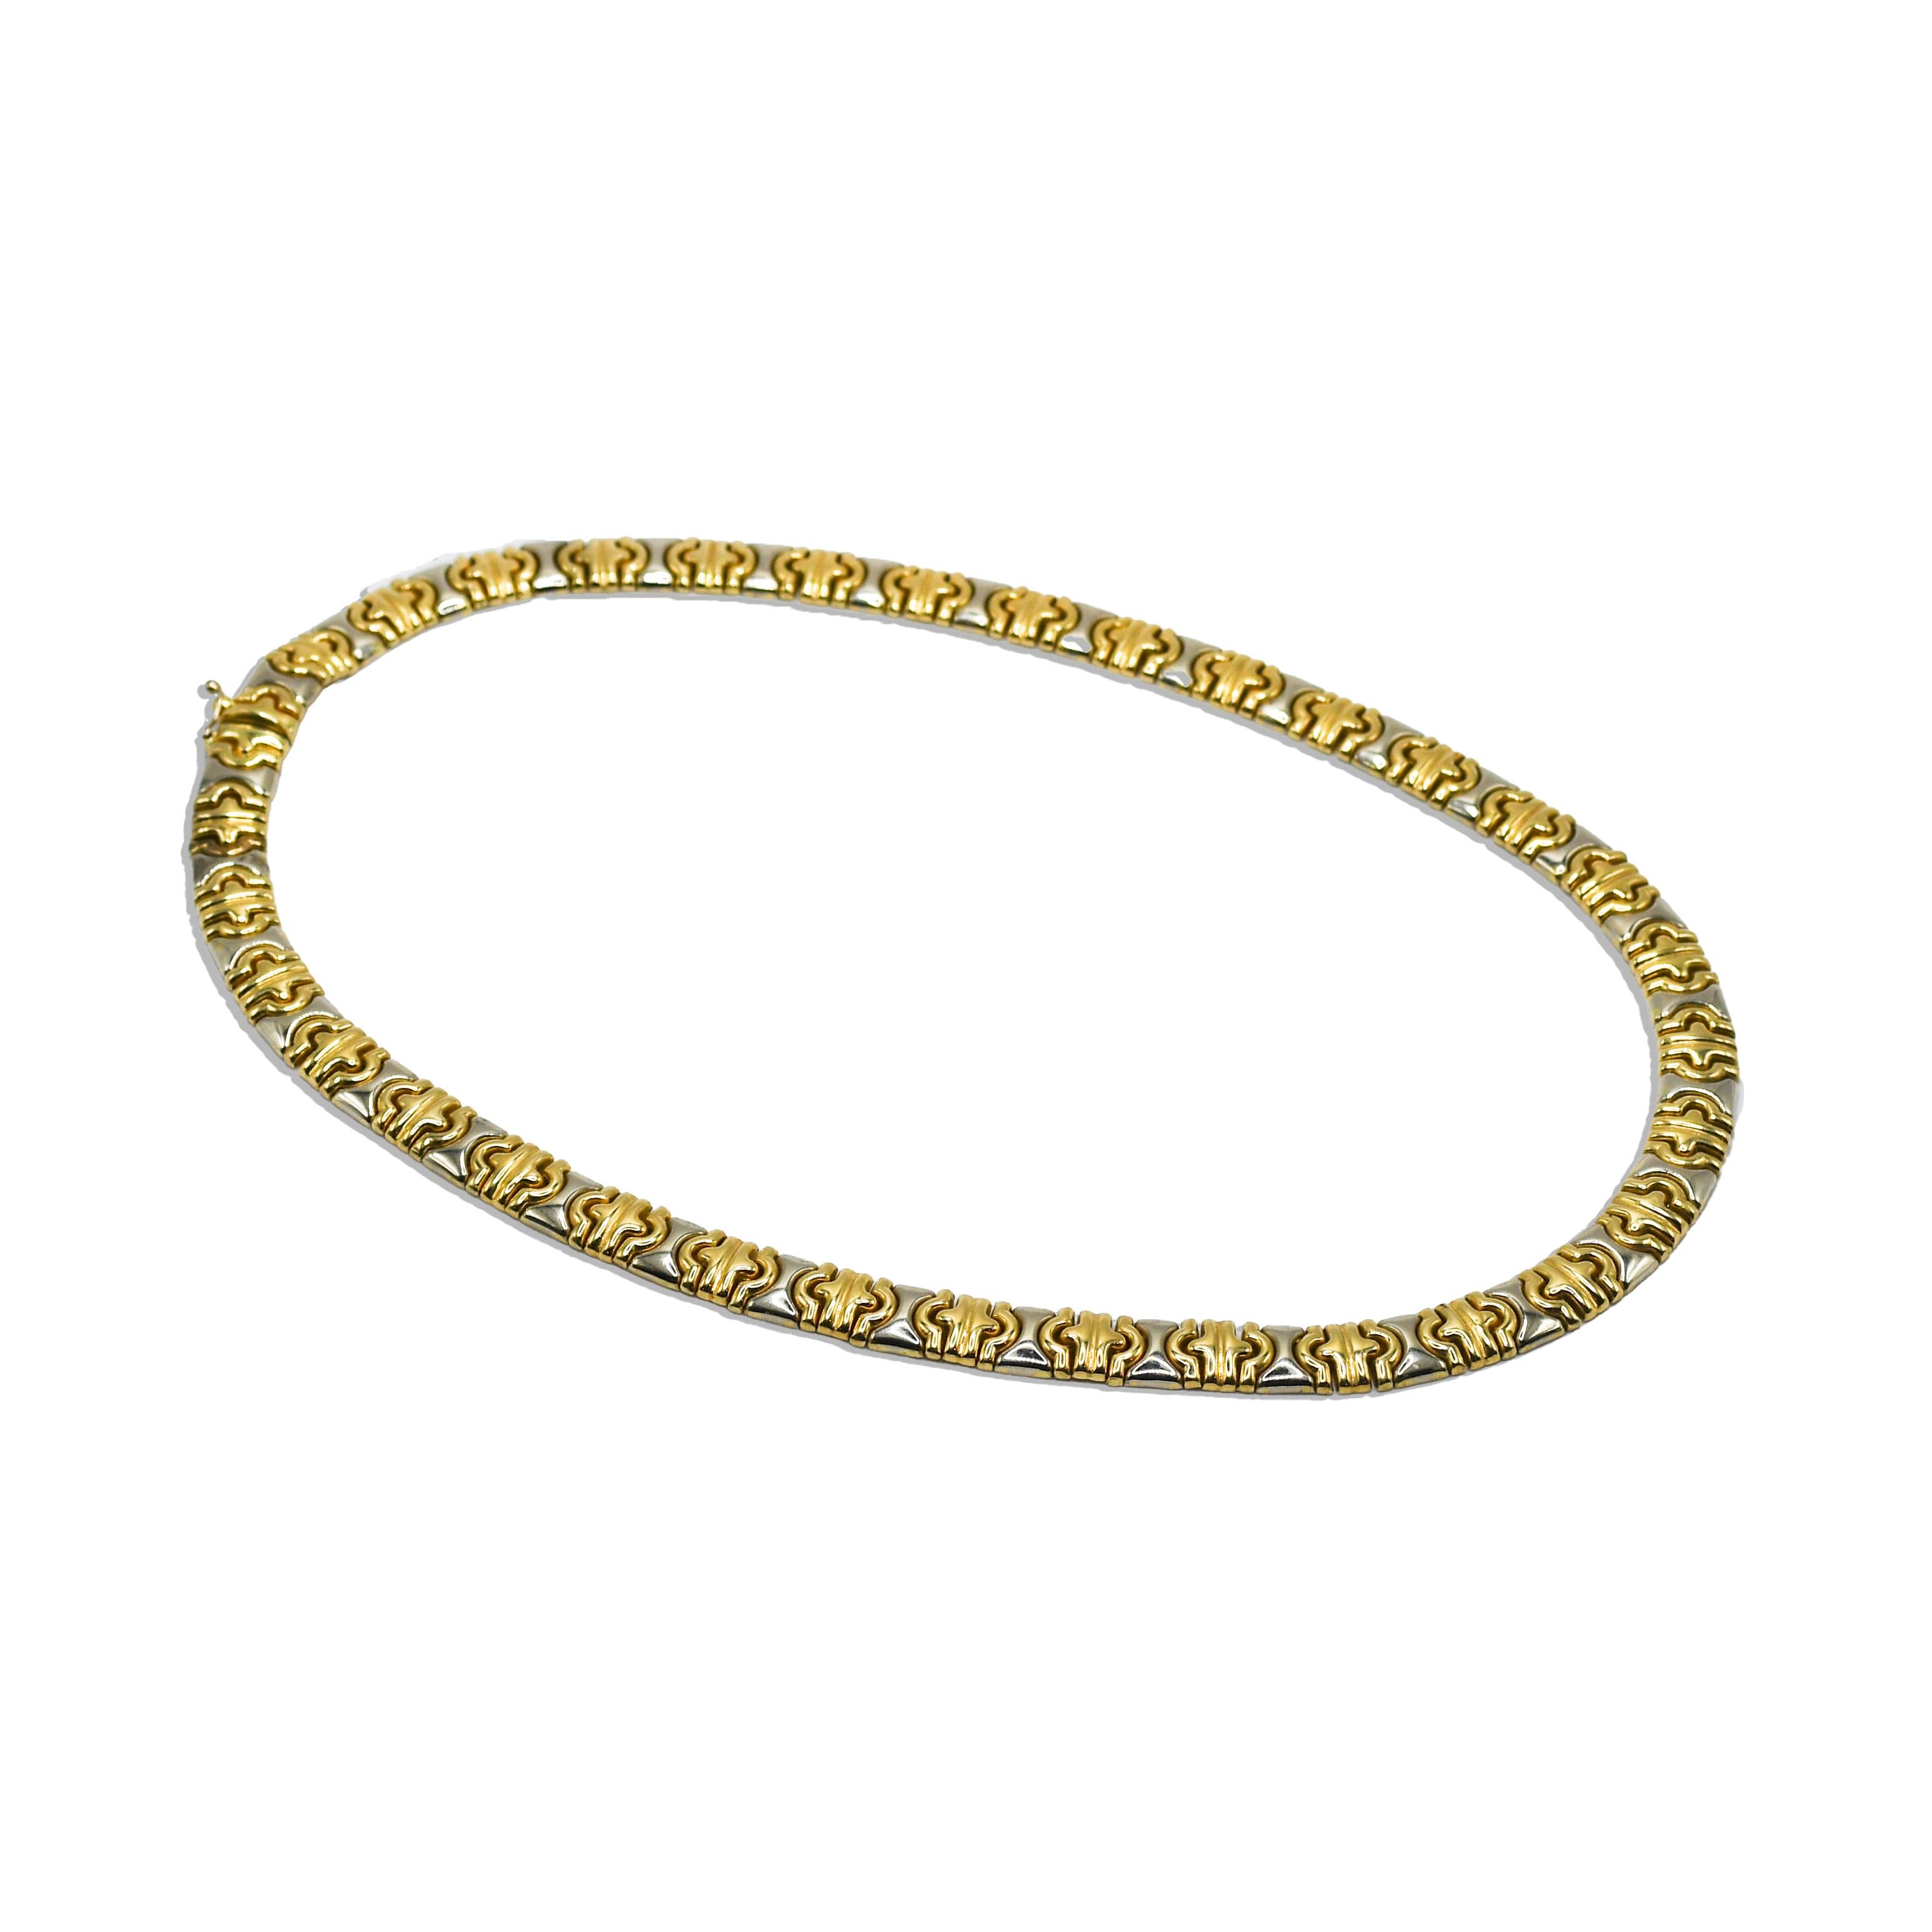 14k yellow gold fancy link necklace.
Stamped 585, 14k Italy on clasps and weighs 44.3 grams.
The necklace measures 18 inches long and 9mm wide.
Excellent condition.